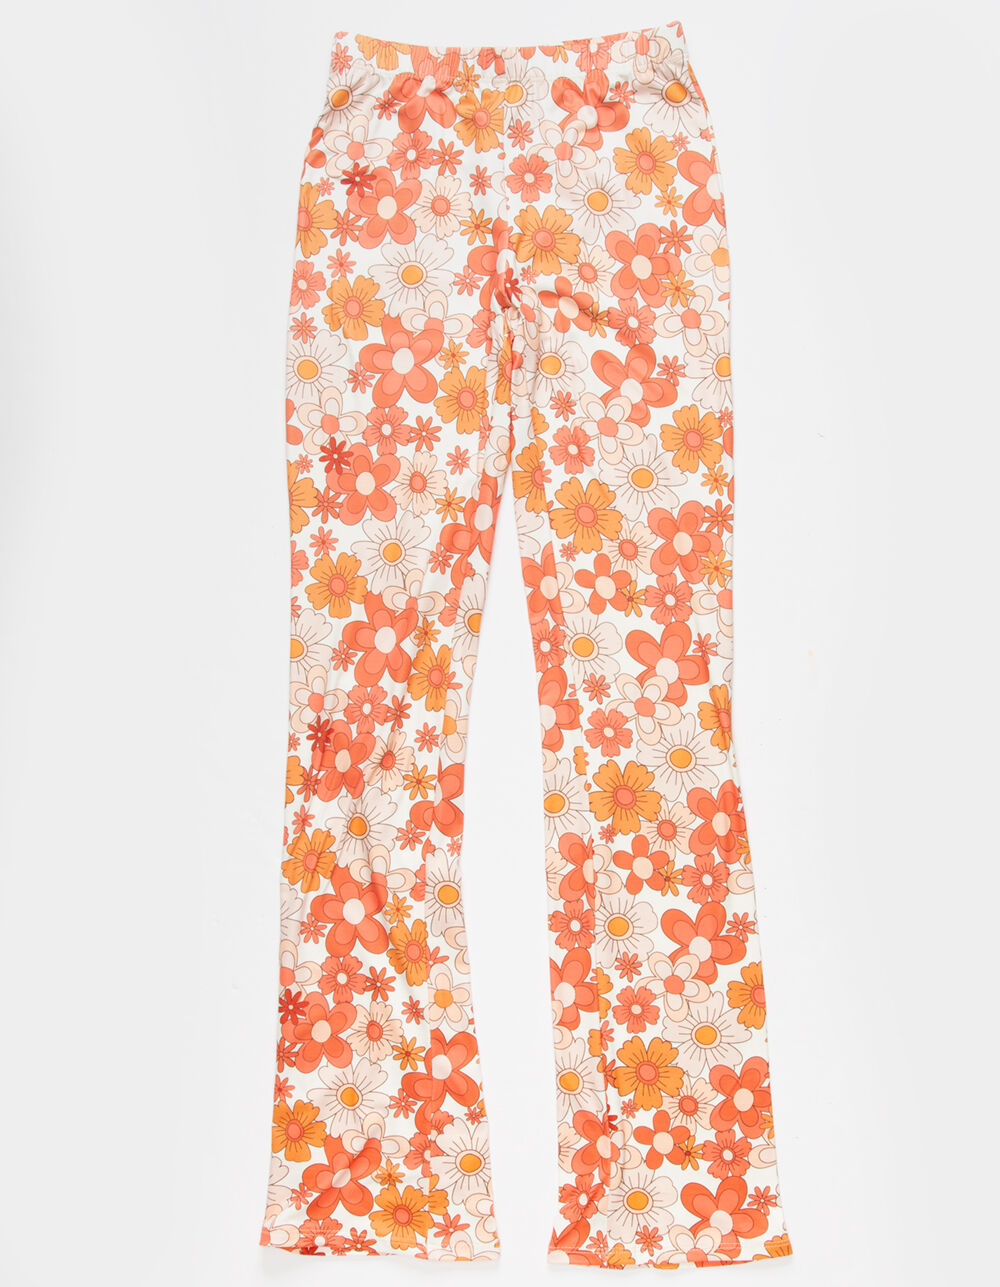 RSQ Girls Floral Flare Pants - CORAL COMBO